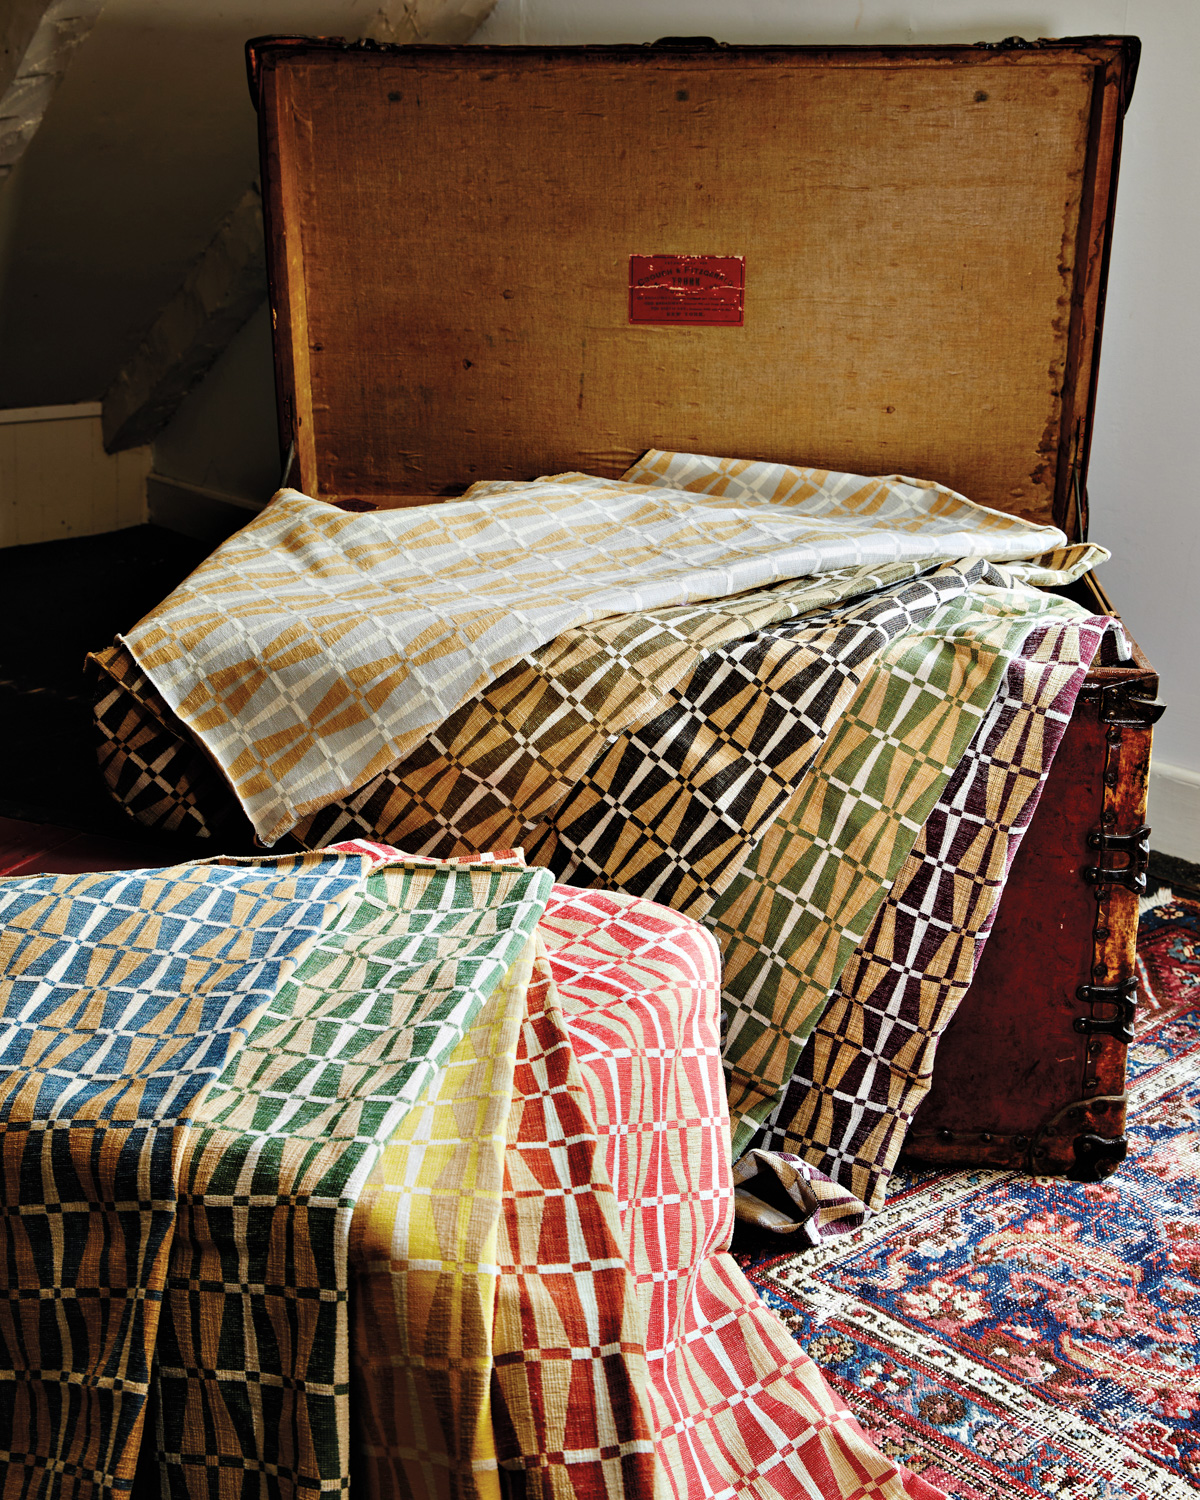 Makrosha textiles in bright colors and patterns